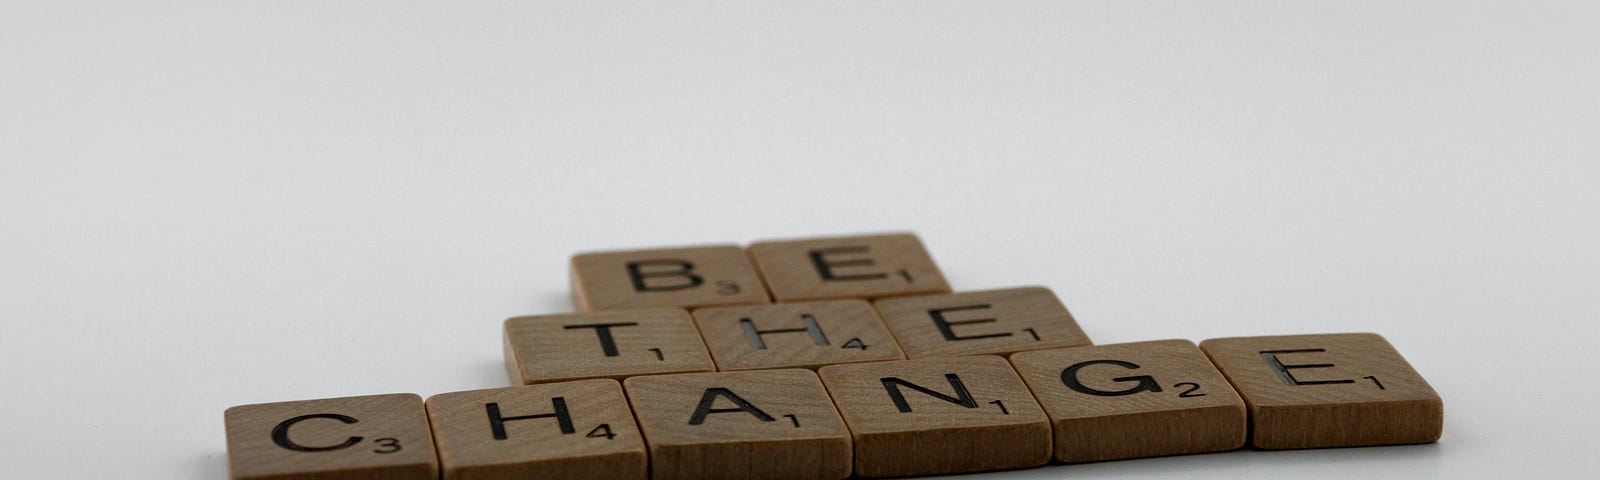 Scrabble tiles spell out “Be the Change.”